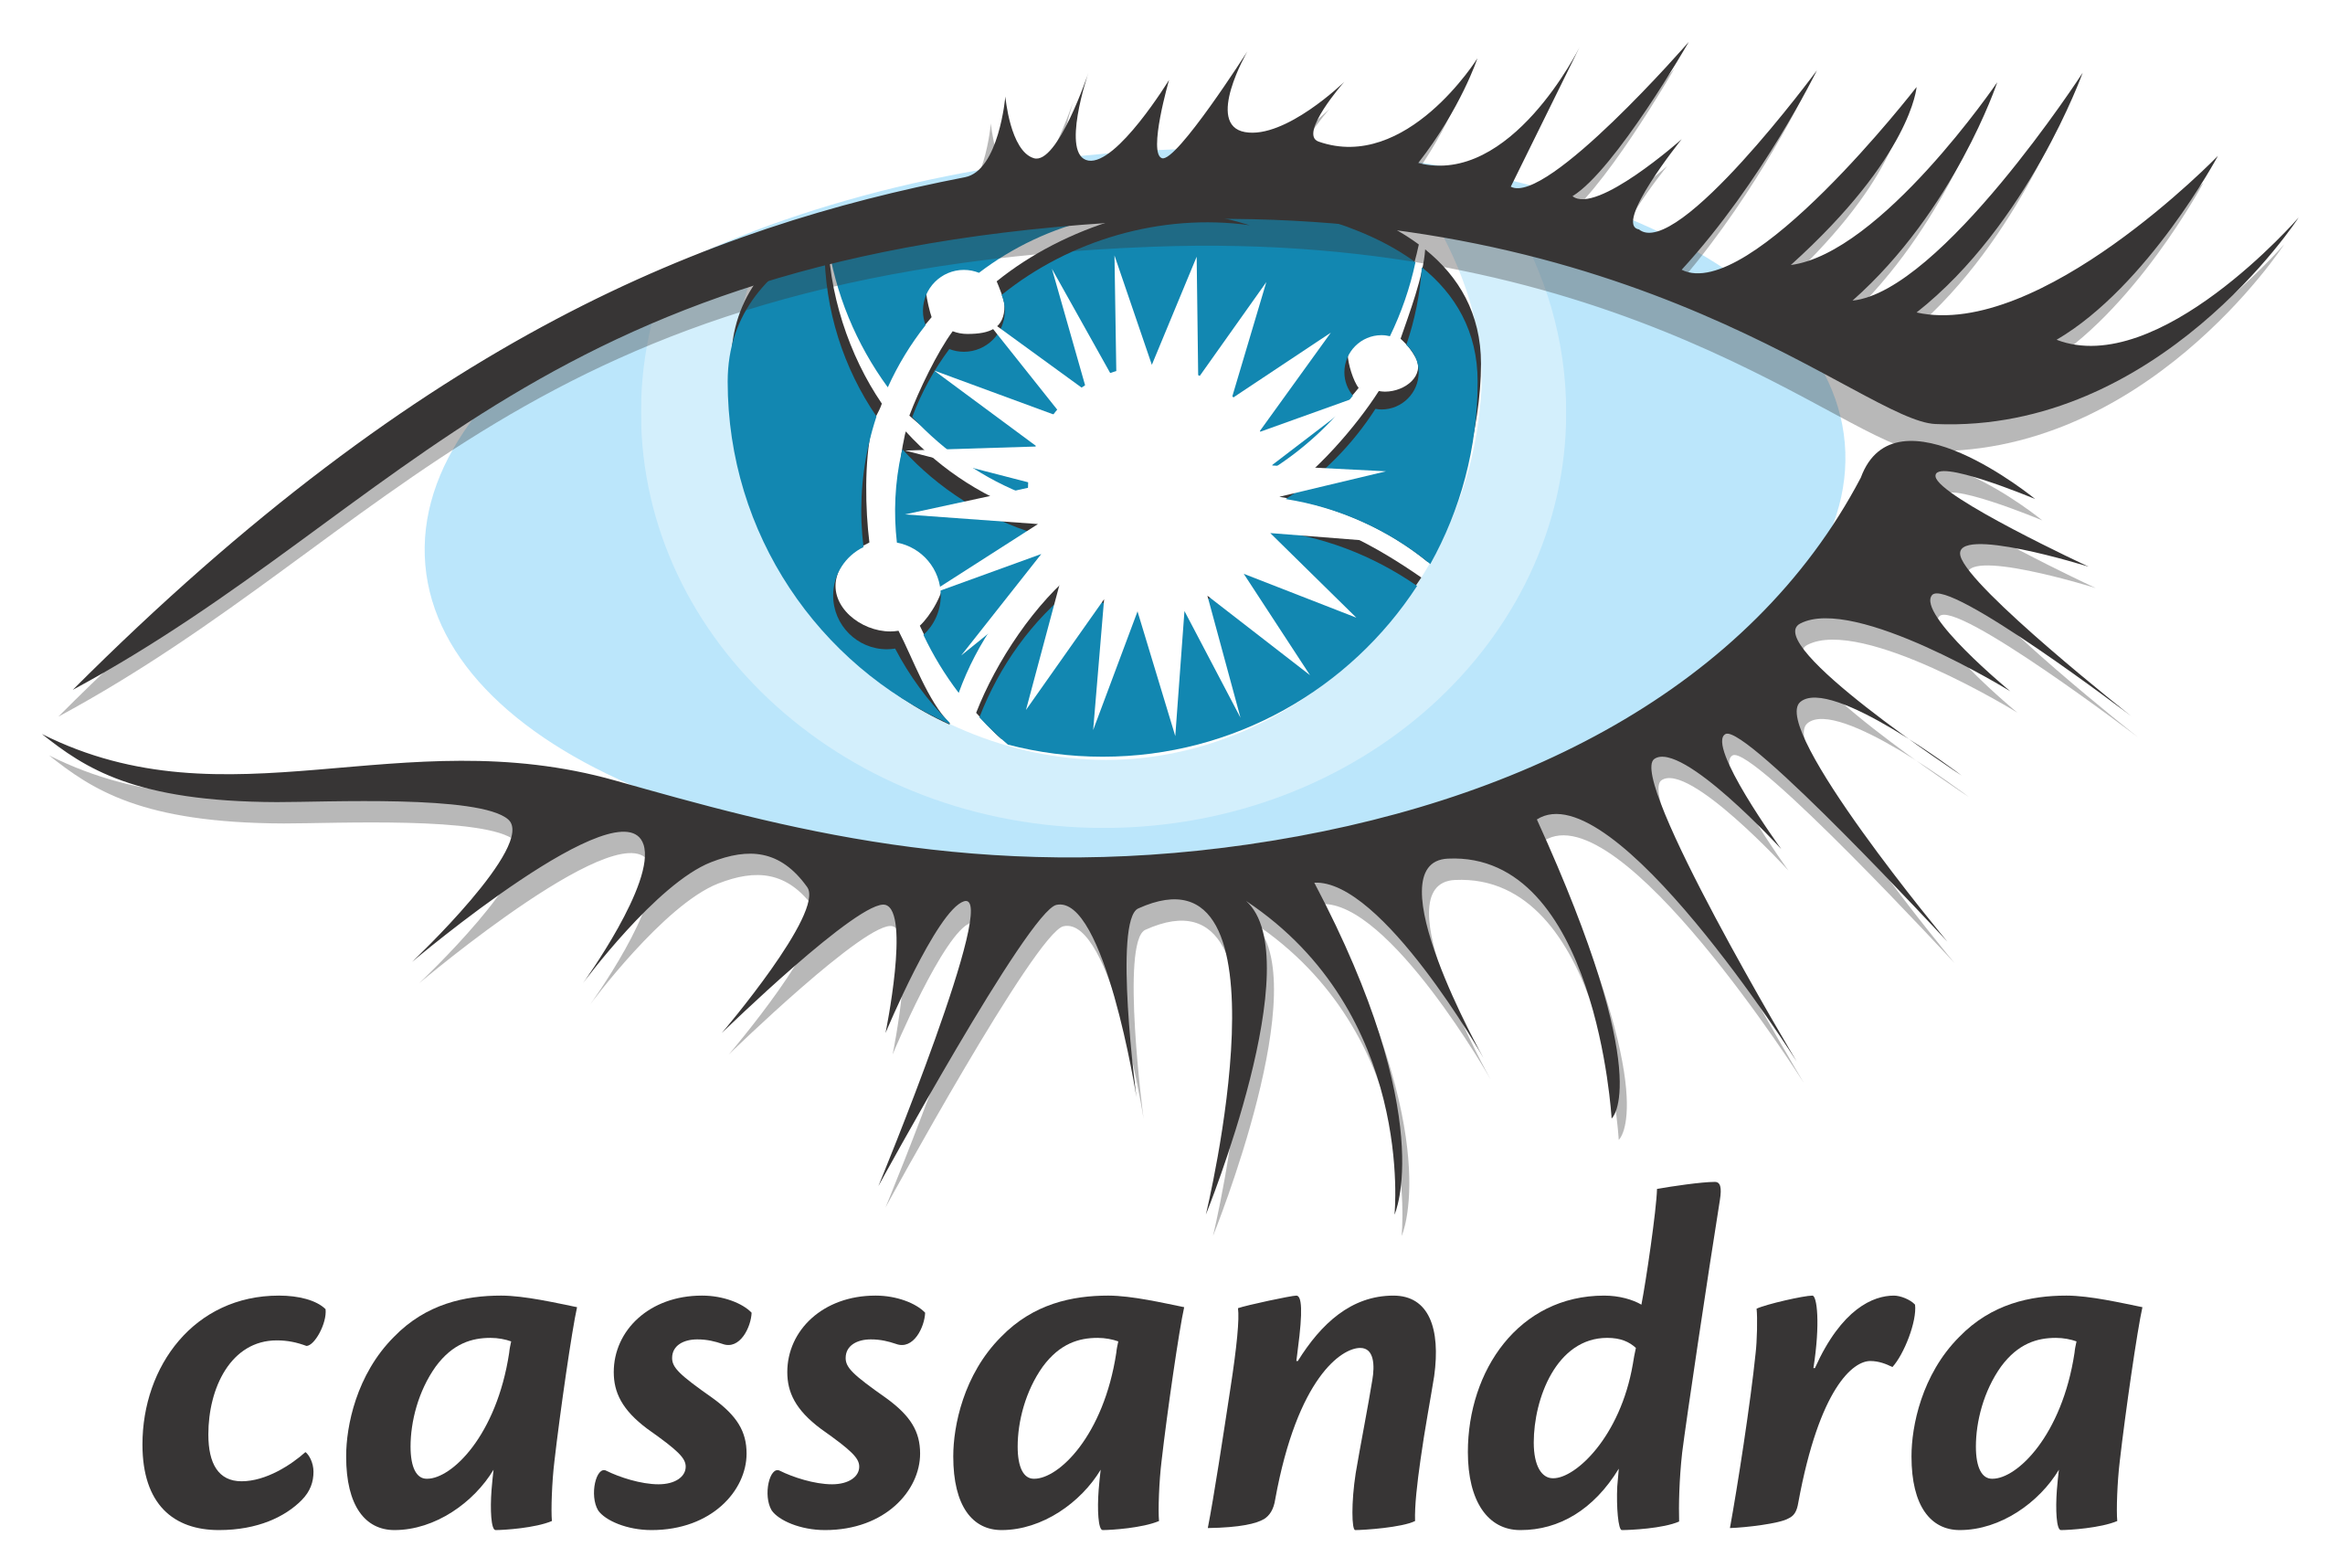 How to Install Cassandra on Kali Linux - Featured